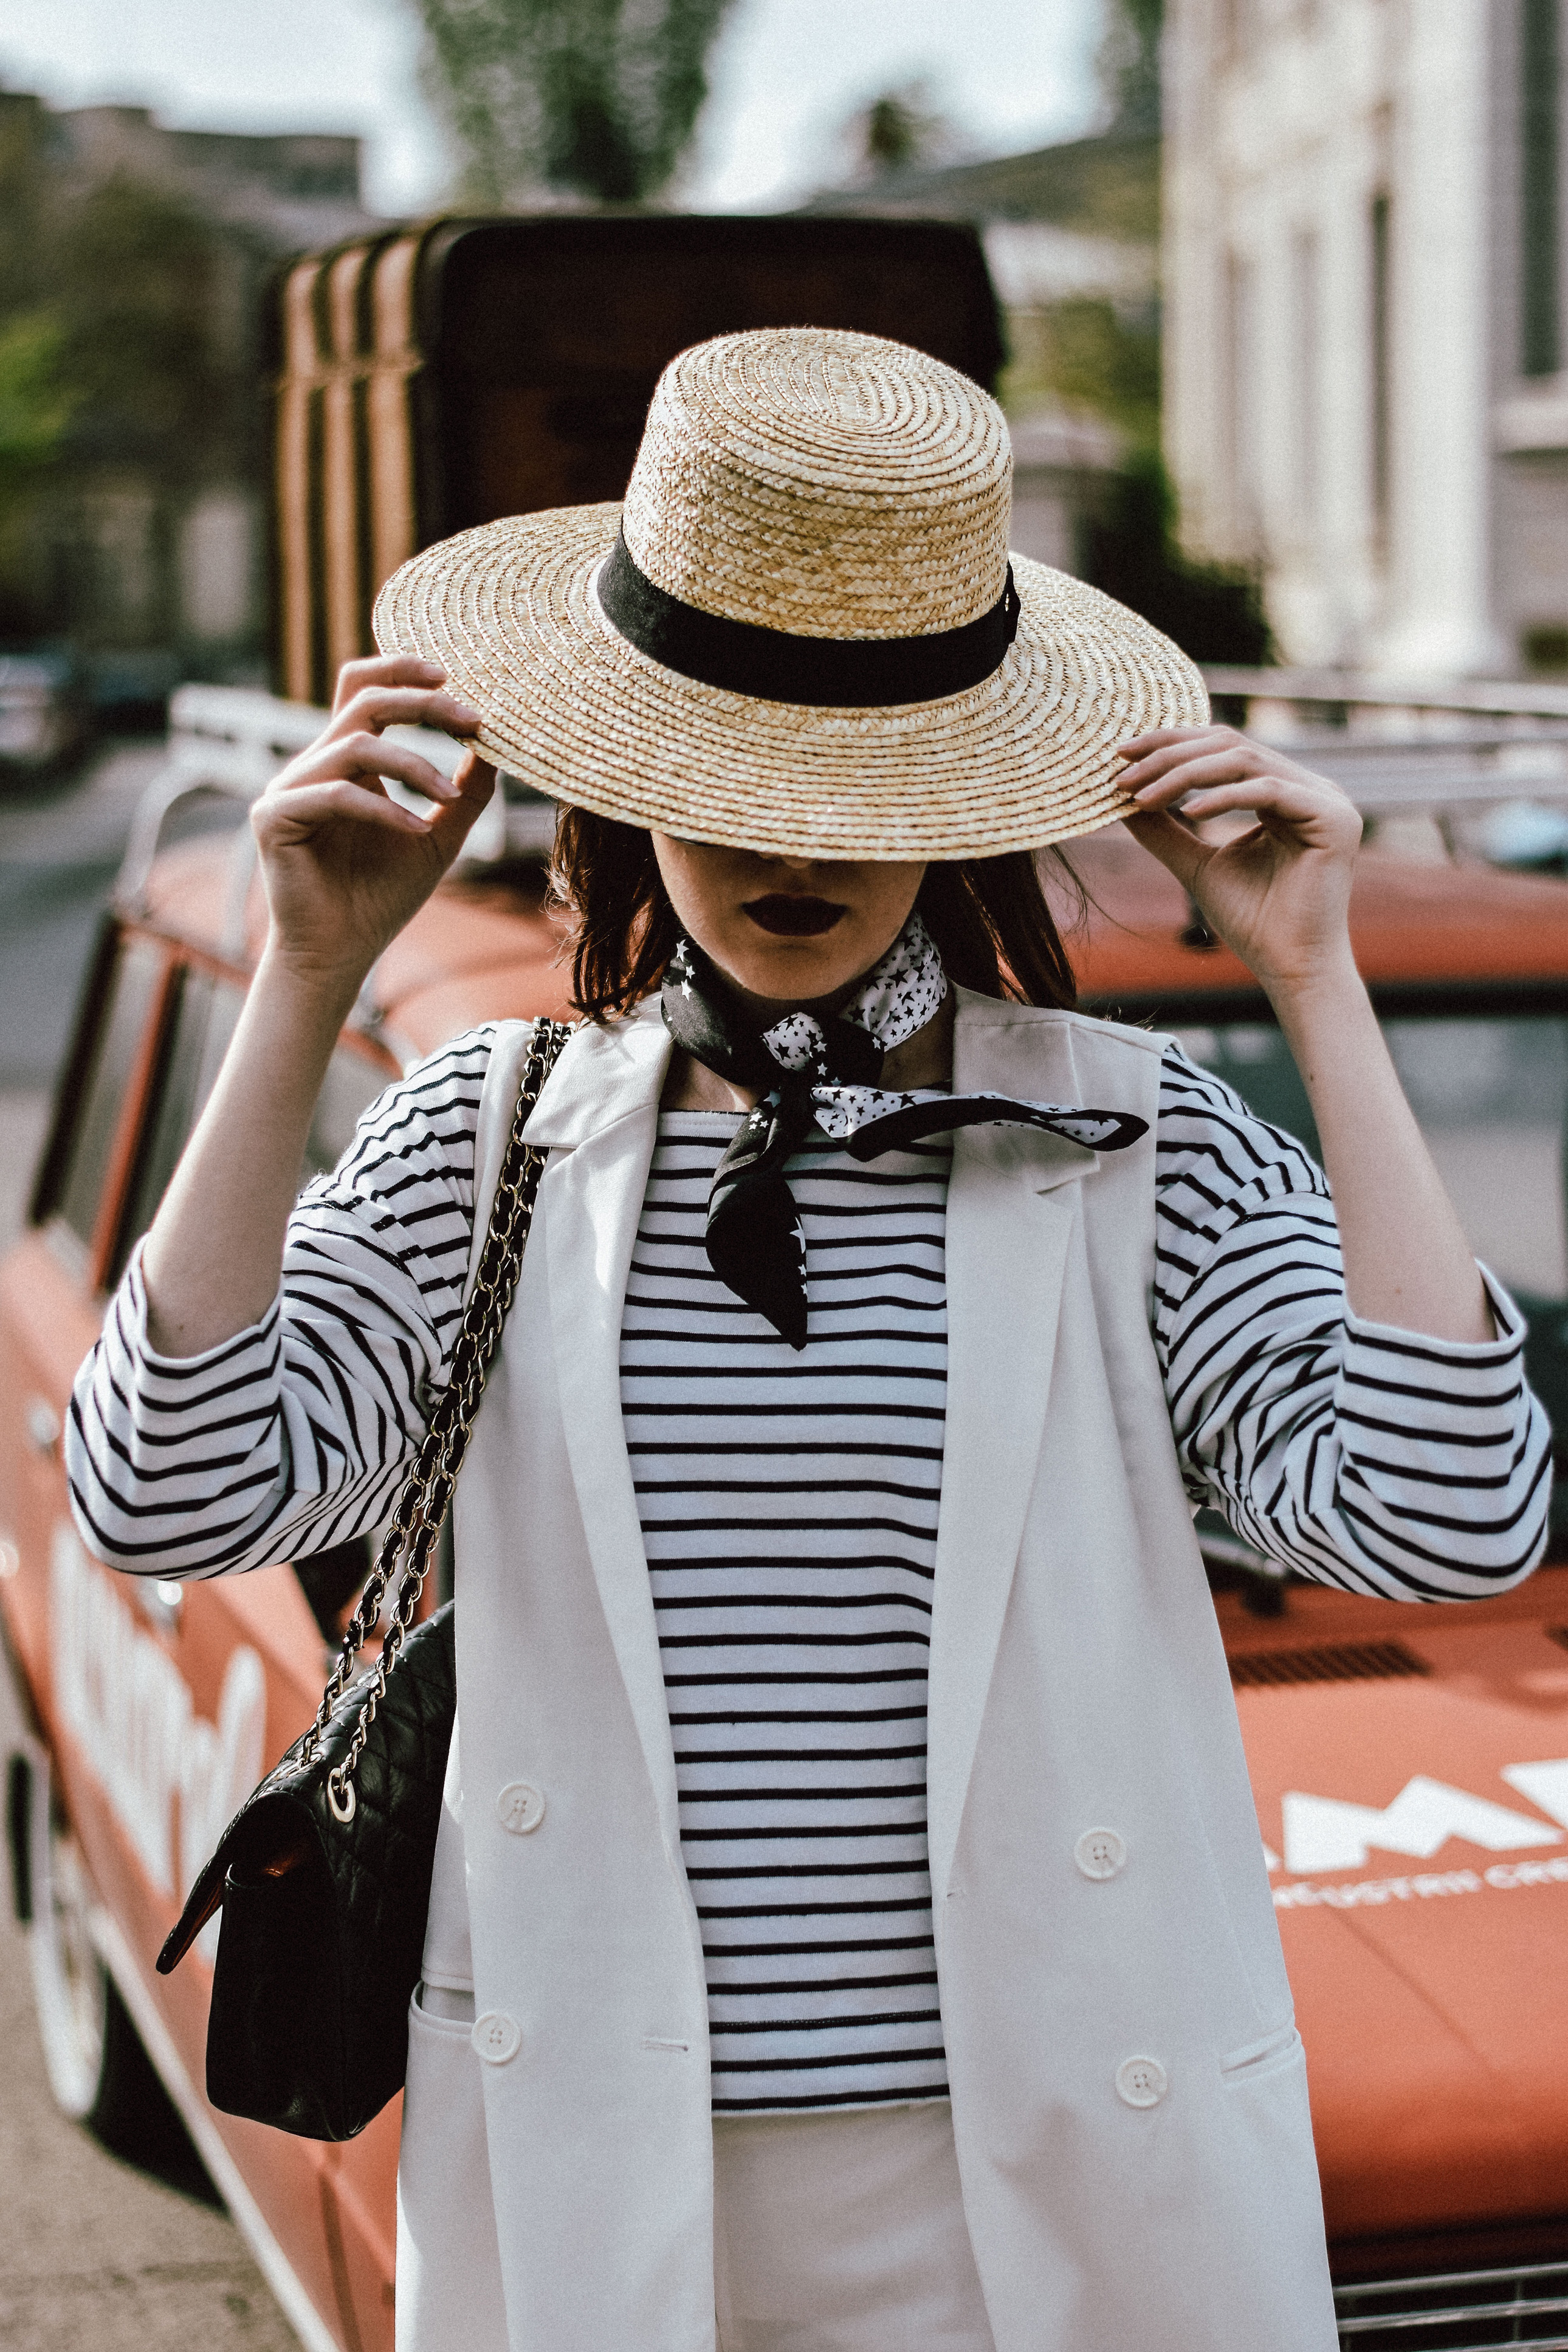 Basic-white-mango-trousers-stradivarius-waistcoat-vest-striped-top-furry-mules-quilted-leather-shoulder-bag-straw-hat-andreea-birsan-couturezilla-spring-outfit-inspiration-7